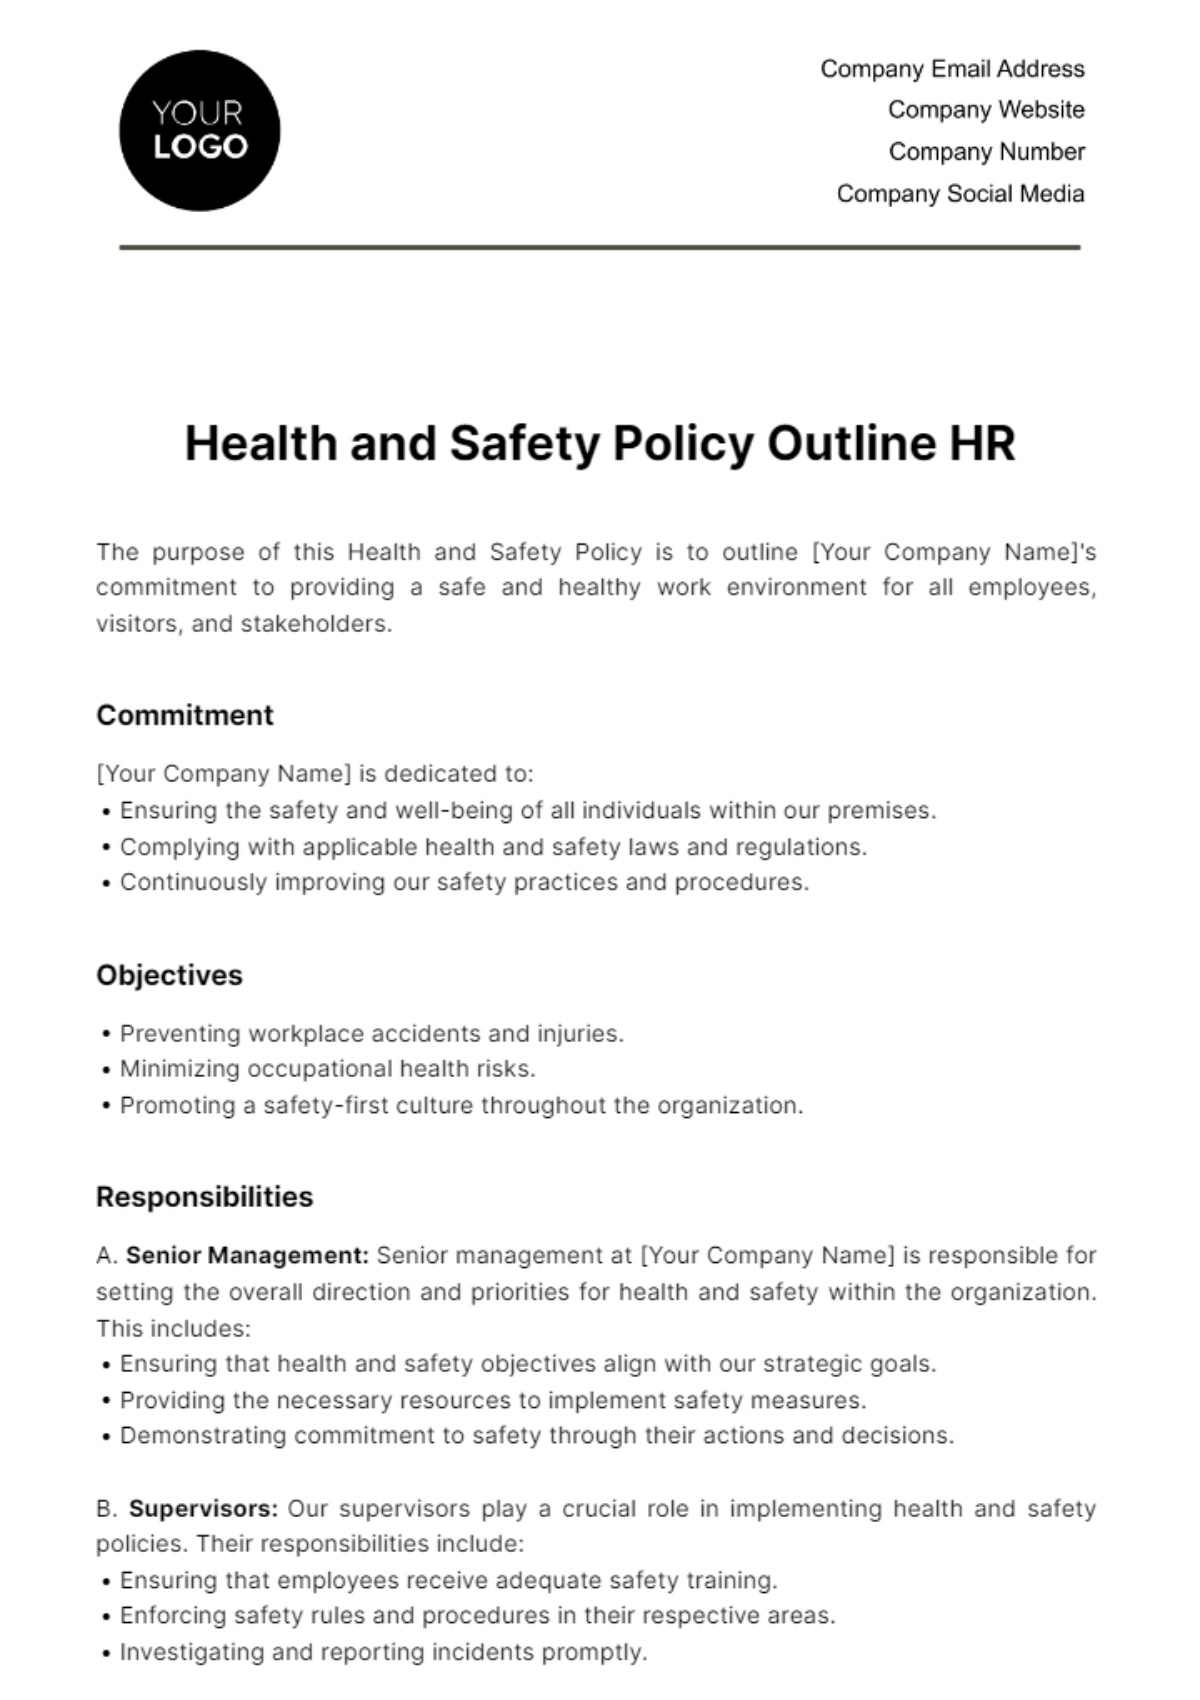 Free Health and Safety Policy Outline HR Template